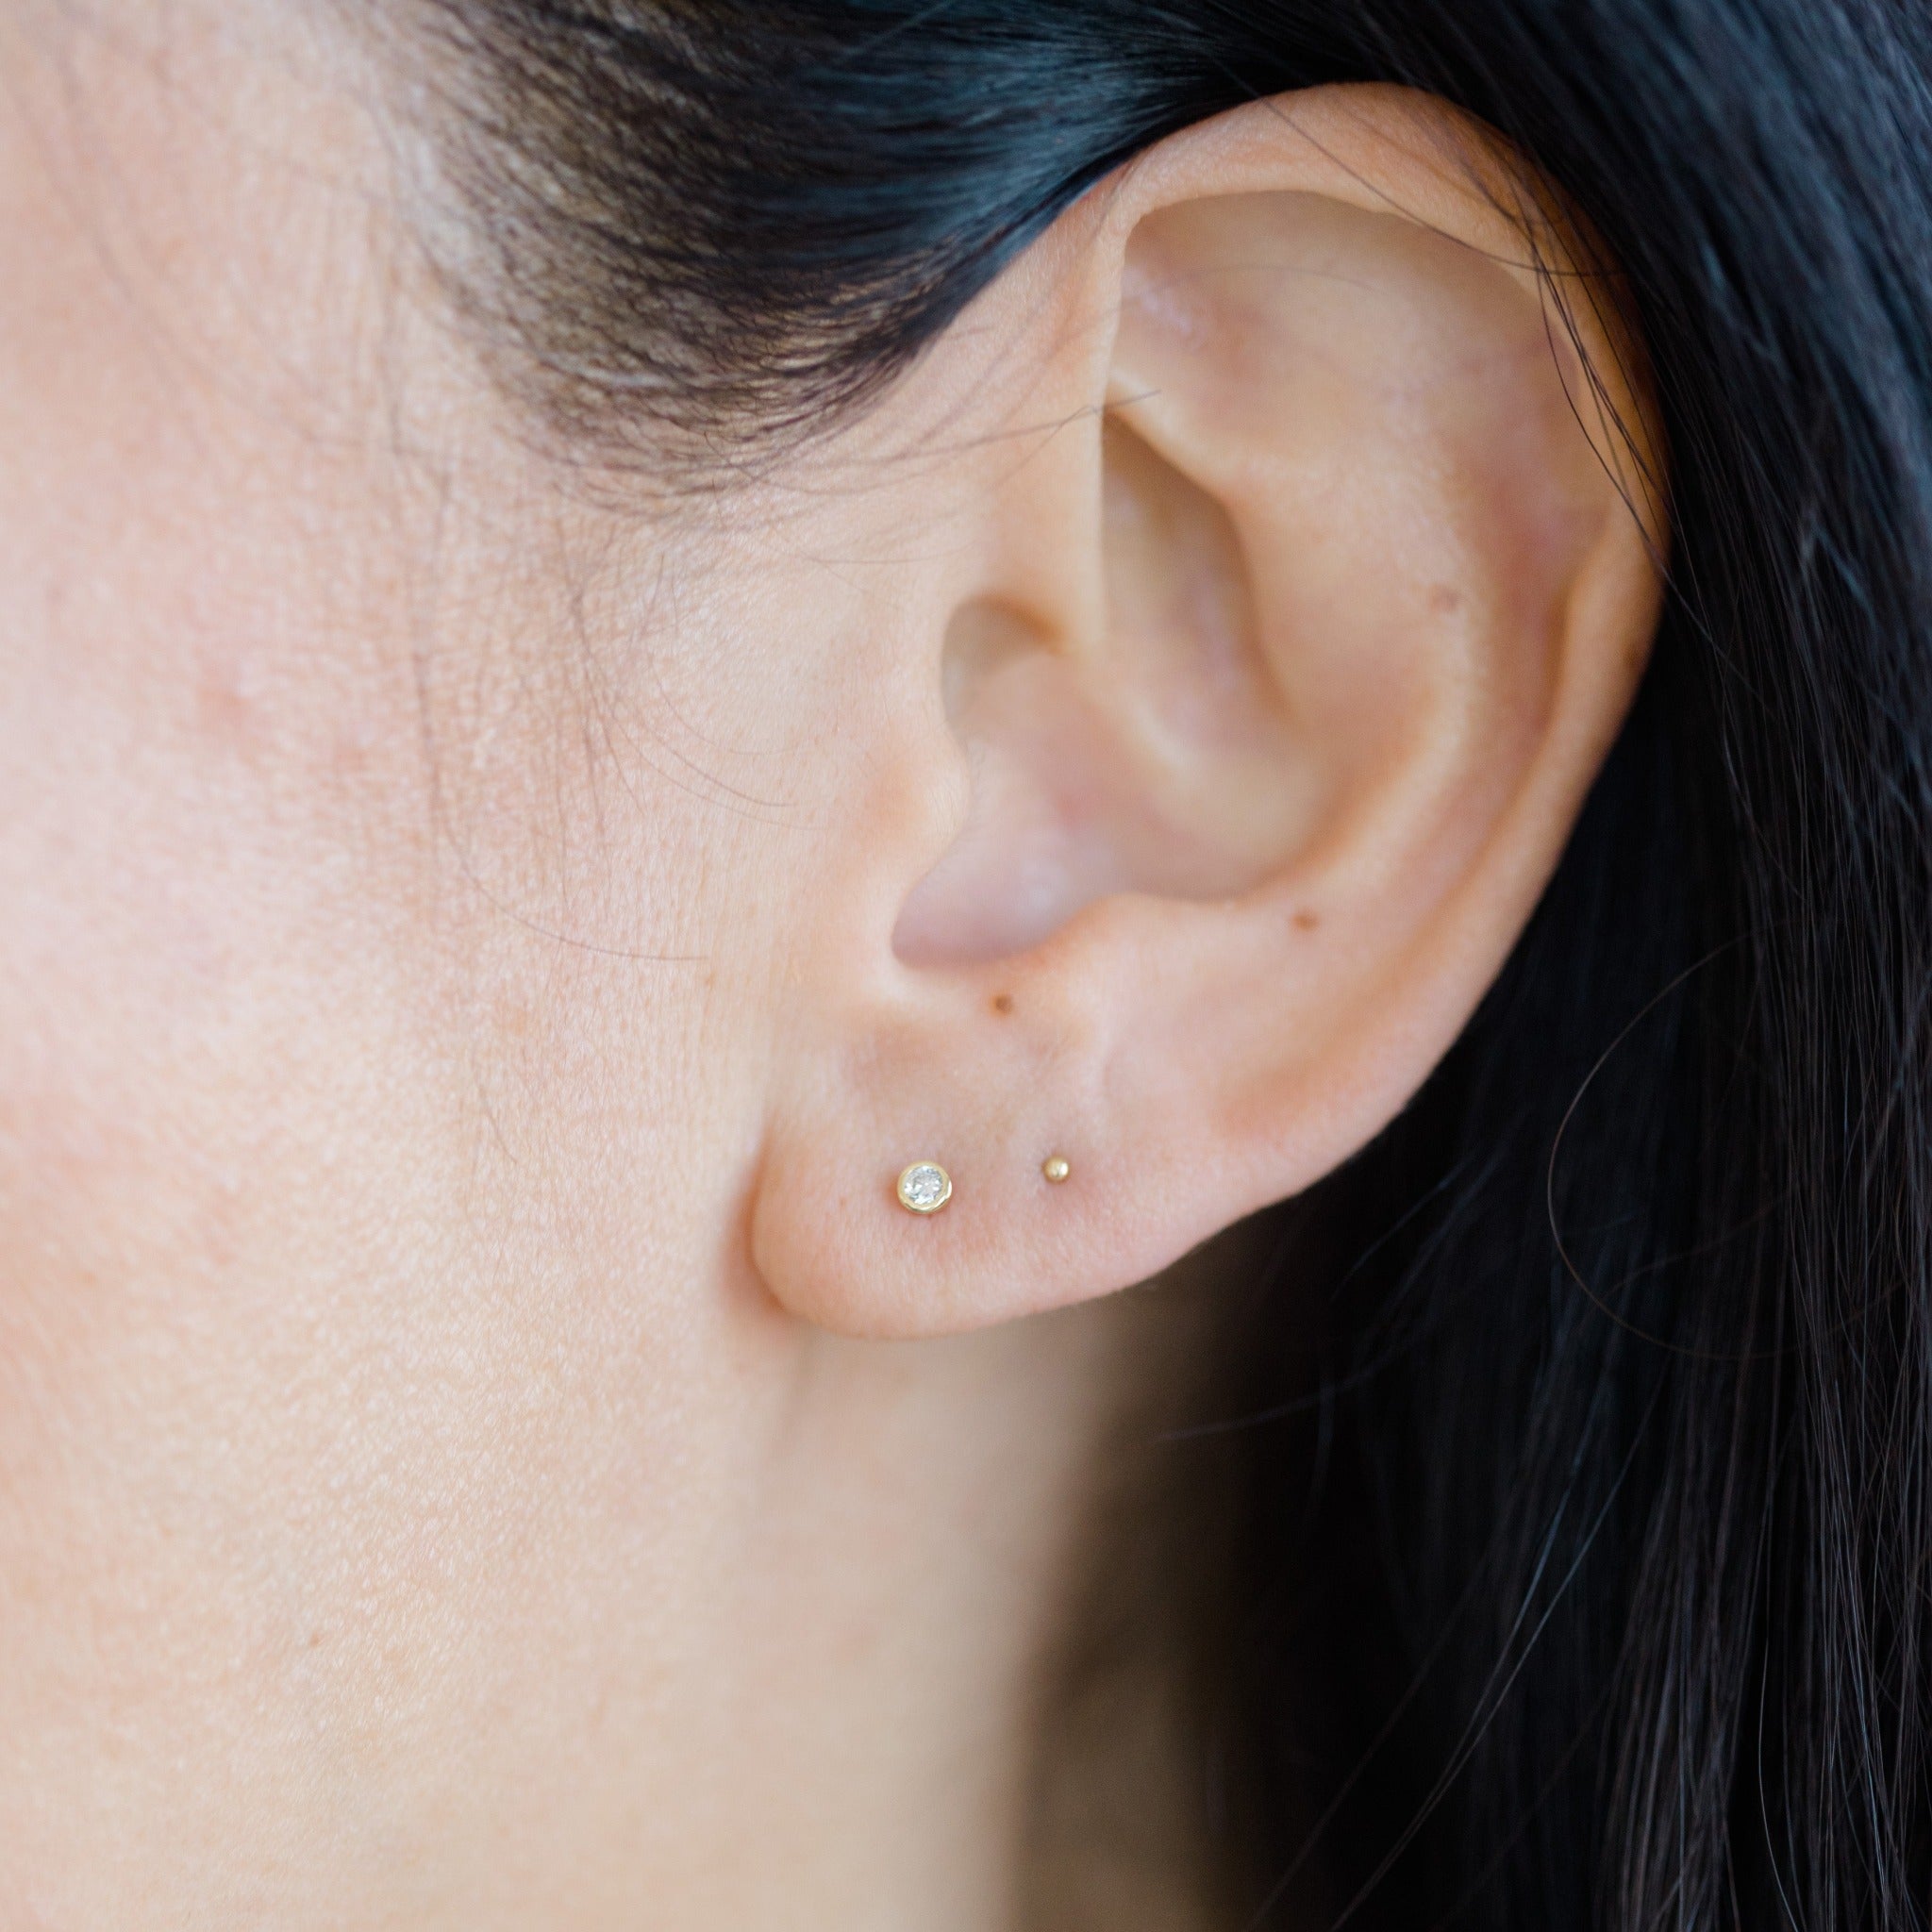 This shiny diamond earring can be combined with other gold stud earrings for a curated earring look.